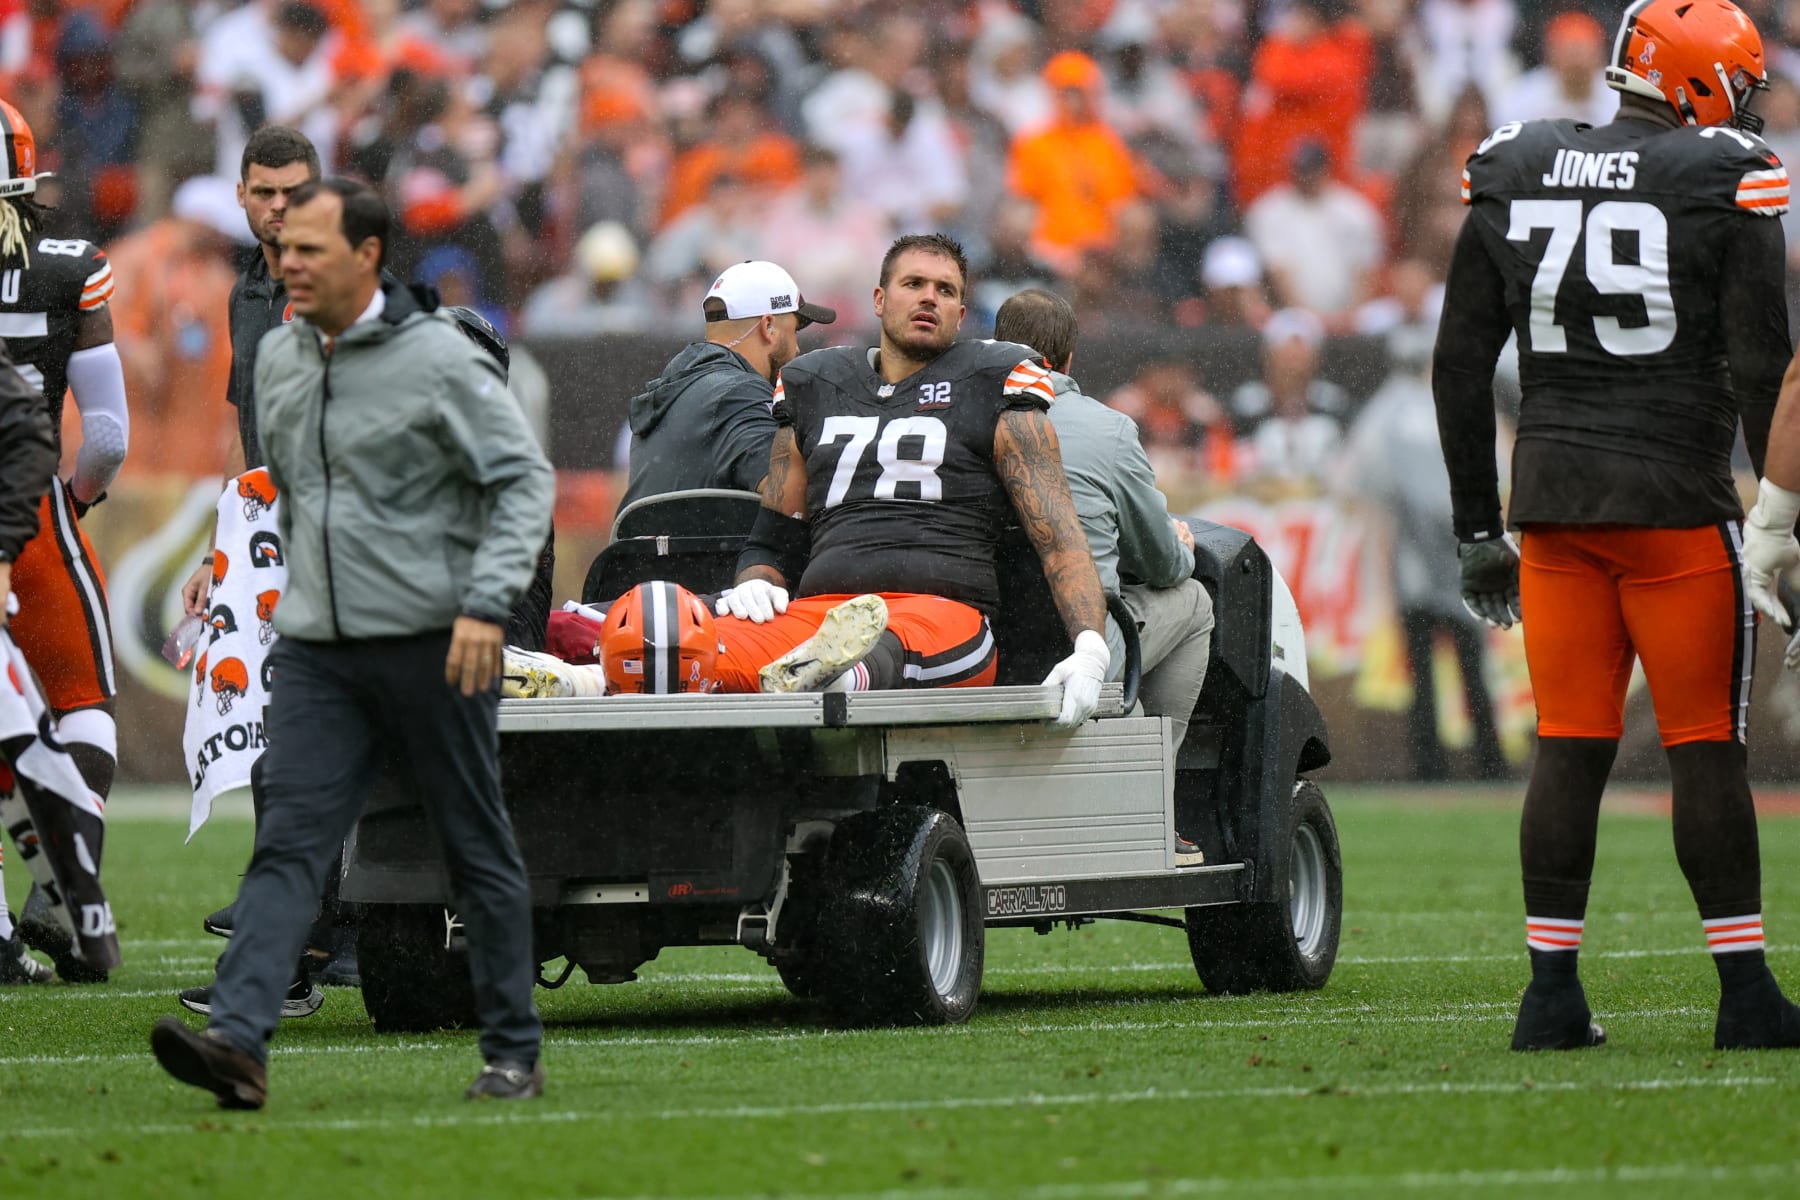 Next man up: Injuries lead to more change on Bengals O-line